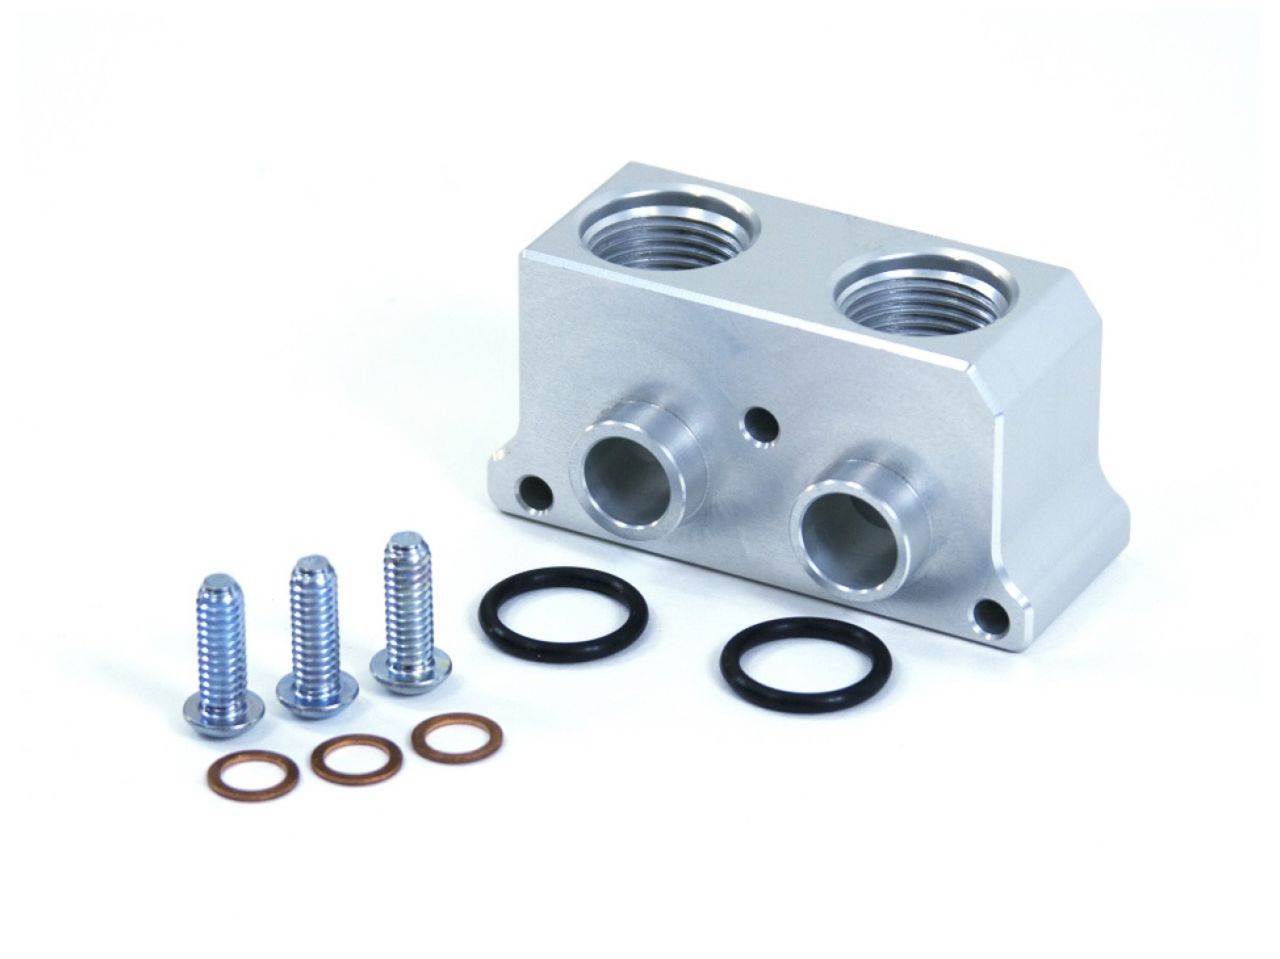 Sikky Oil Pan Adapter Block, Side Port, Includes -10AN Orb Fittings For Remo